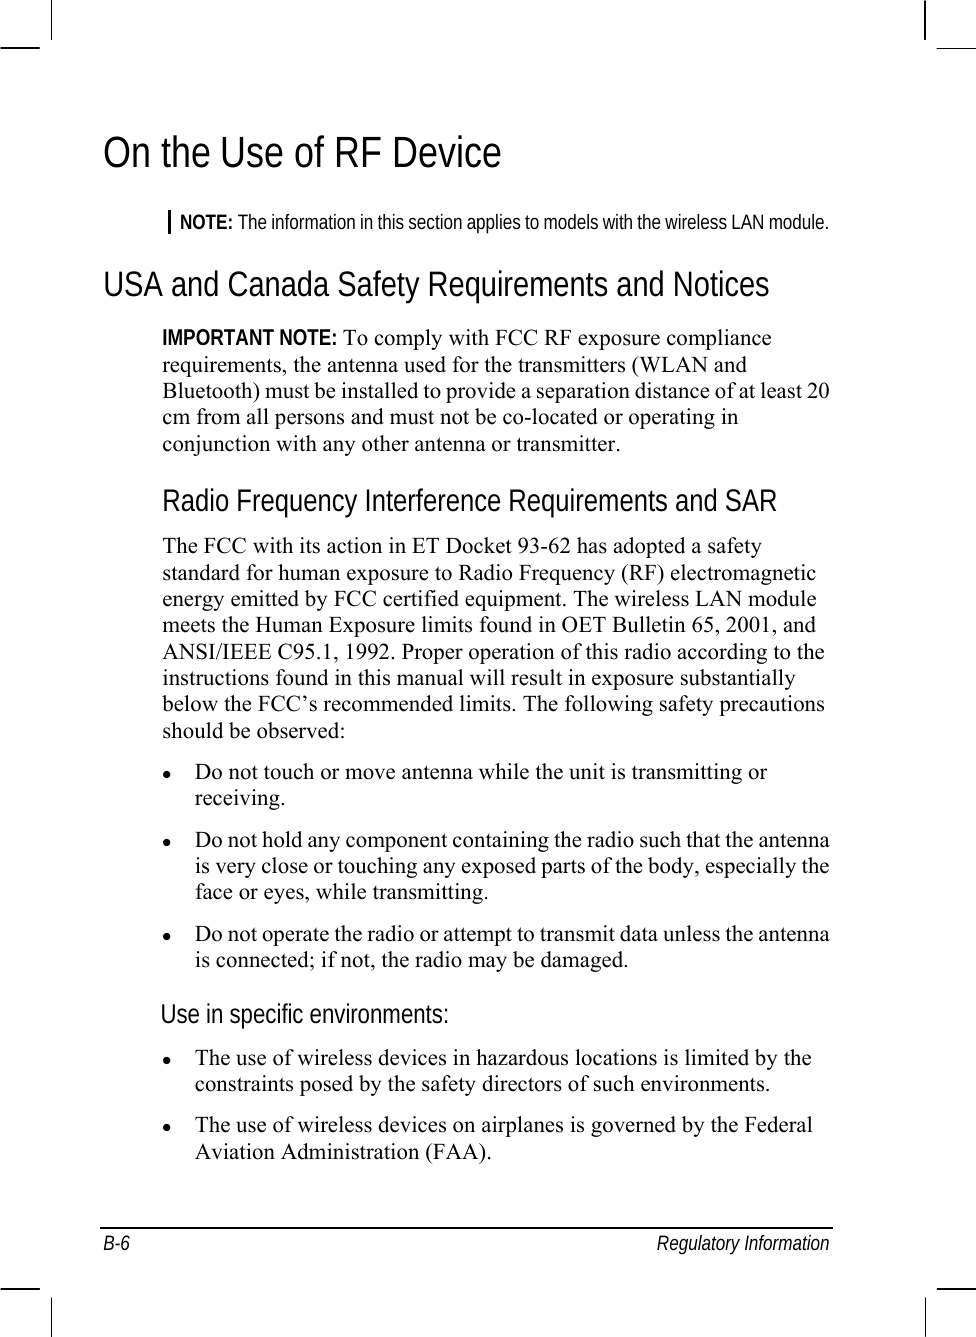  B-6 Regulatory Information On the Use of RF Device NOTE: The information in this section applies to models with the wireless LAN module. USA and Canada Safety Requirements and Notices IMPORTANT NOTE: To comply with FCC RF exposure compliance requirements, the antenna used for the transmitters (WLAN and Bluetooth) must be installed to provide a separation distance of at least 20 cm from all persons and must not be co-located or operating in conjunction with any other antenna or transmitter. Radio Frequency Interference Requirements and SAR The FCC with its action in ET Docket 93-62 has adopted a safety standard for human exposure to Radio Frequency (RF) electromagnetic energy emitted by FCC certified equipment. The wireless LAN module meets the Human Exposure limits found in OET Bulletin 65, 2001, and ANSI/IEEE C95.1, 1992. Proper operation of this radio according to the instructions found in this manual will result in exposure substantially below the FCC’s recommended limits. The following safety precautions should be observed: z Do not touch or move antenna while the unit is transmitting or receiving. z Do not hold any component containing the radio such that the antenna is very close or touching any exposed parts of the body, especially the face or eyes, while transmitting. z Do not operate the radio or attempt to transmit data unless the antenna is connected; if not, the radio may be damaged. Use in specific environments: z The use of wireless devices in hazardous locations is limited by the constraints posed by the safety directors of such environments. z The use of wireless devices on airplanes is governed by the Federal Aviation Administration (FAA). 